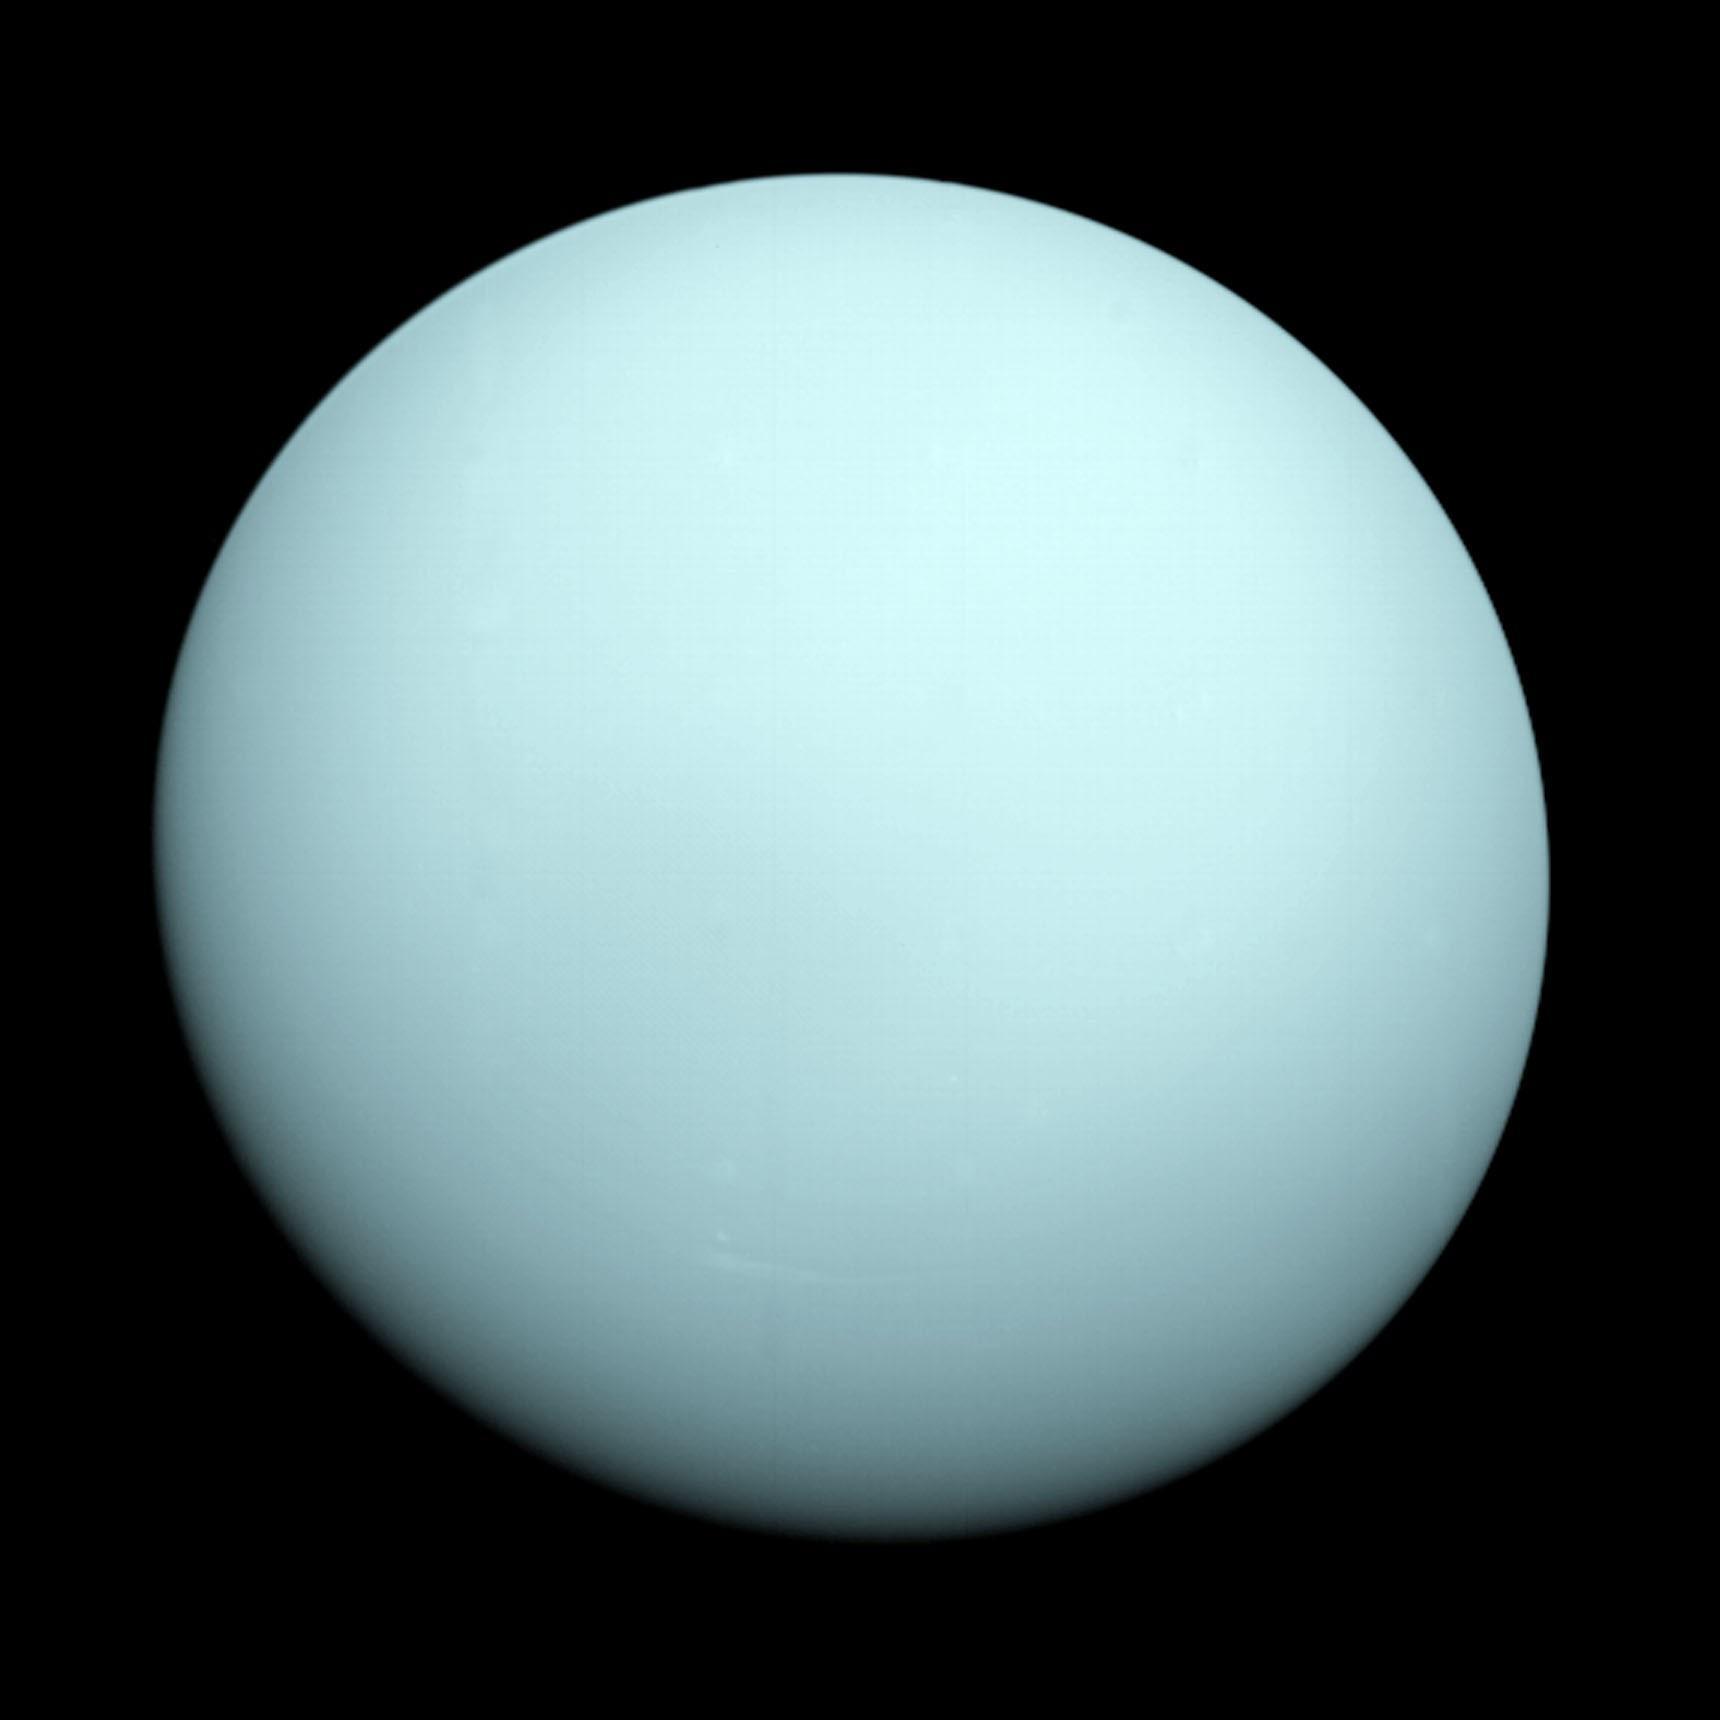 This is an image of the planet Uranus taken by the spacecraft Voyager 2 in 1986. The Voyager project is managed for NASA by the Jet Propulsion Laboratory. Credit: NASA/JPL-Caltech